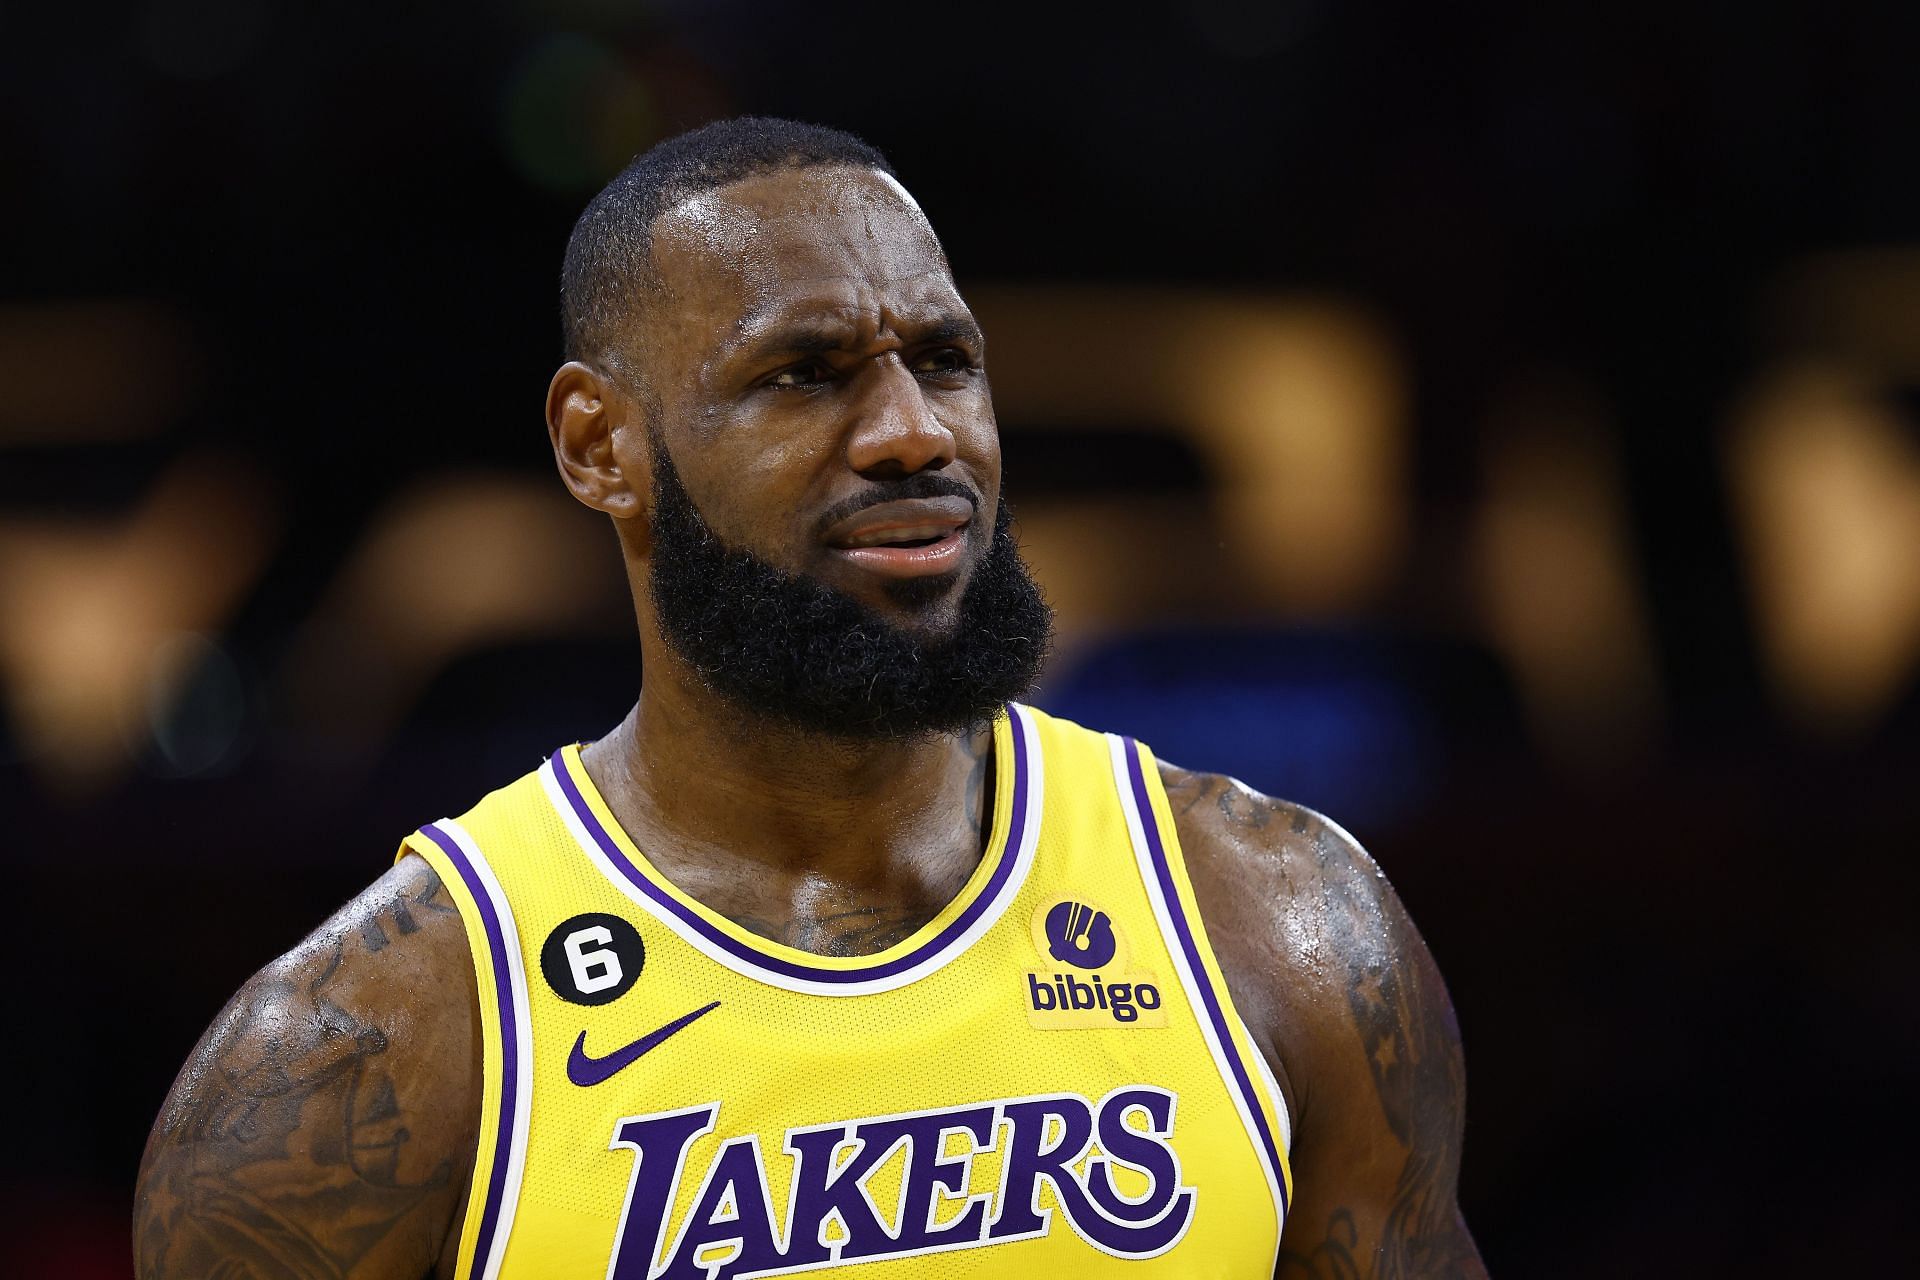 LeBron James' jersey sales: How many US states does the LA Lakers star ...